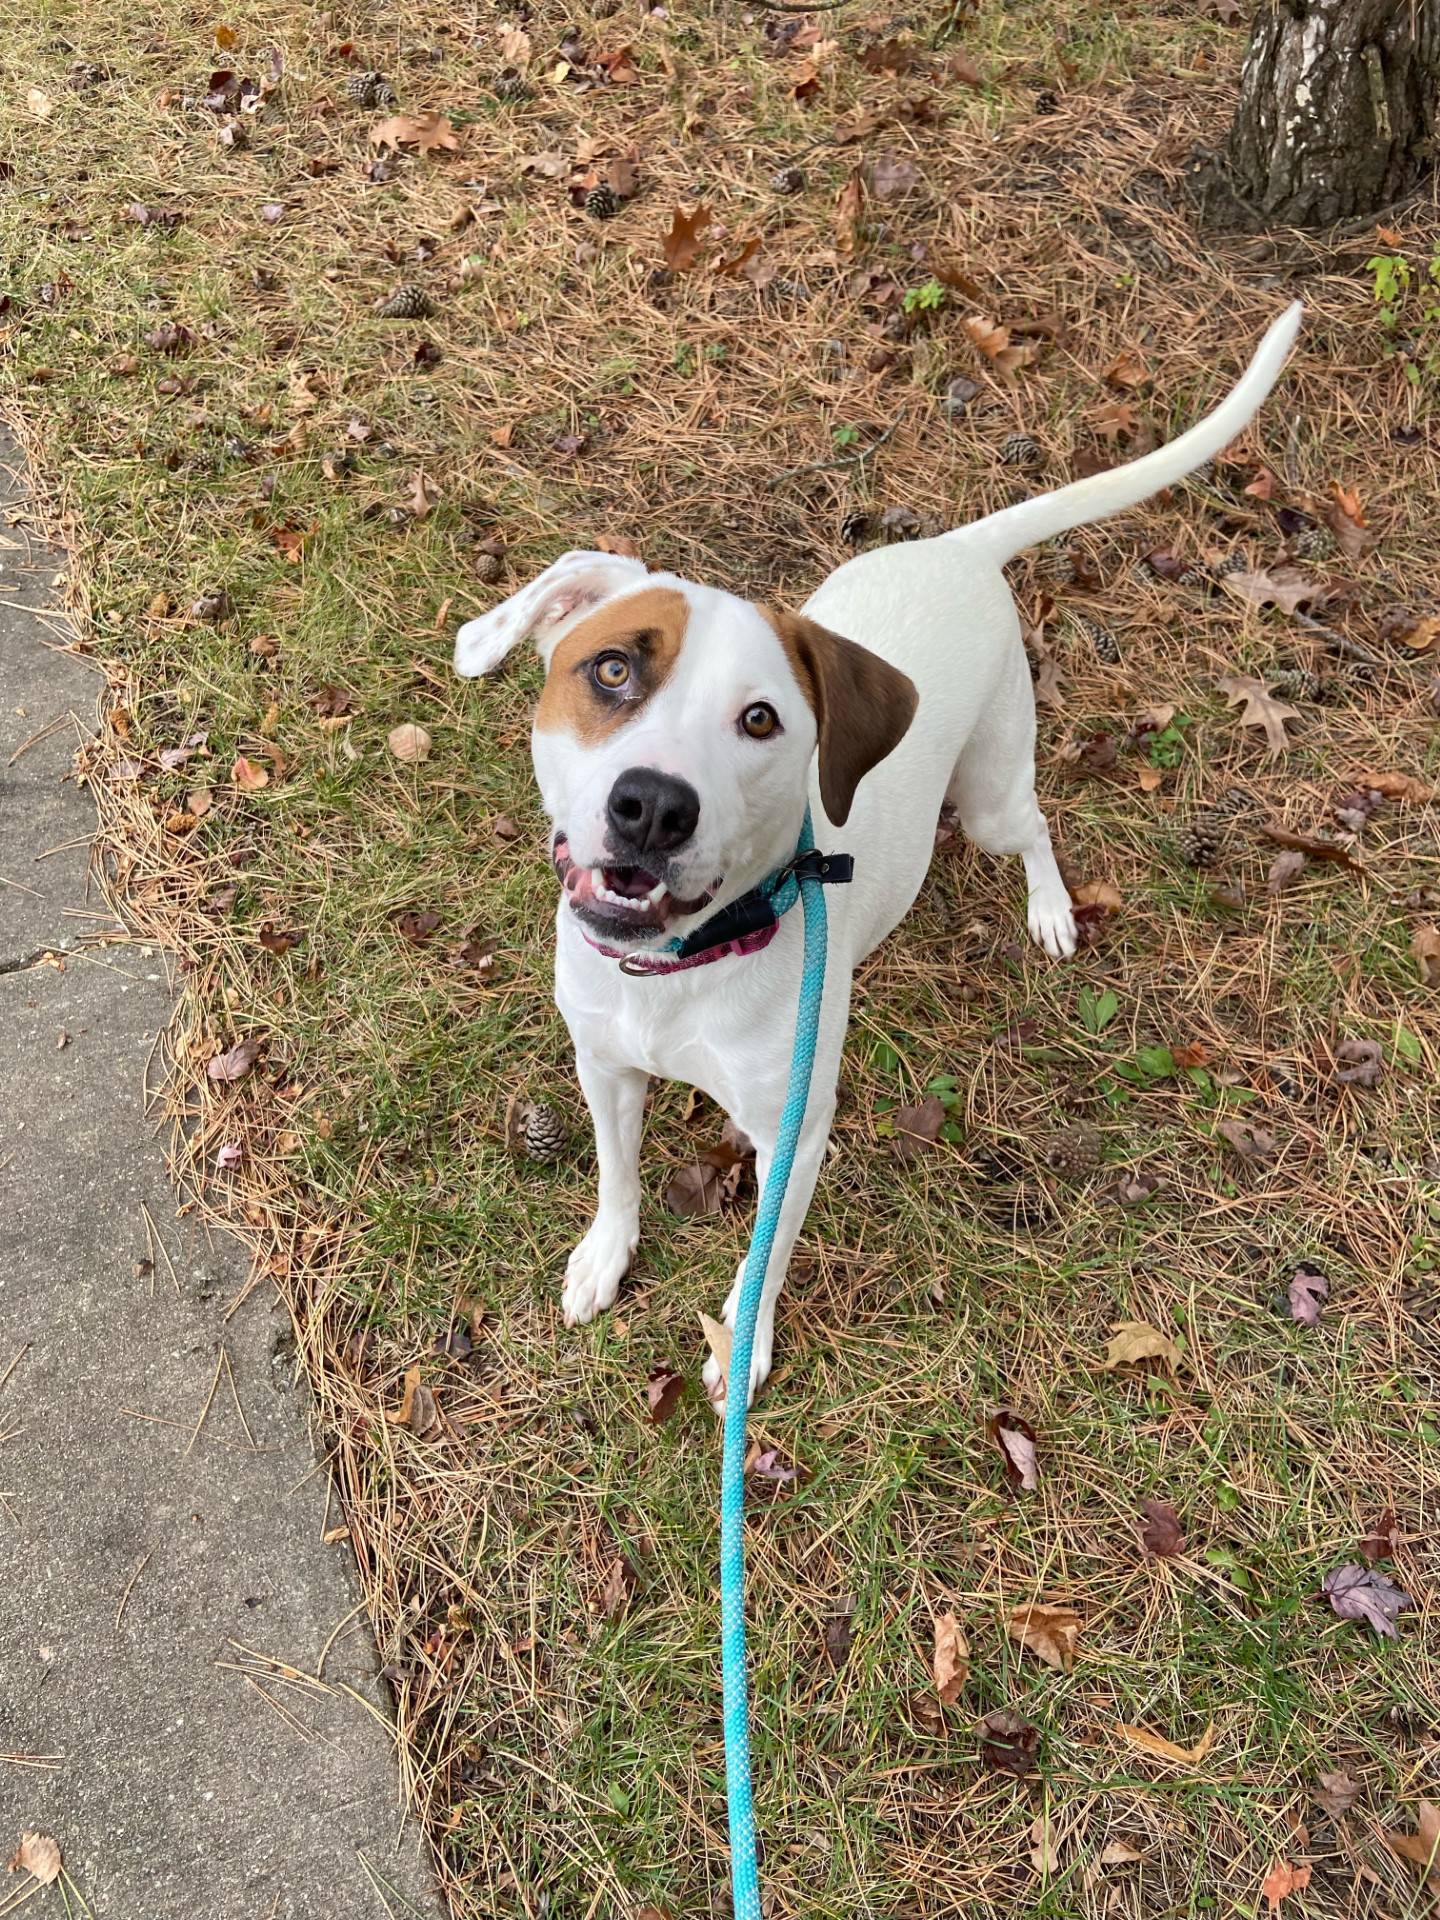 Cranberry is a 1-year-old, 50-pound, terrier mix that was rescued in Tennessee. She is playful and affectionate. She needs an active household where she can run and play. But she also likes cuddling on the couch. To meet Cranberry, email Dogadoption@nawsus.org. Visit nawsus.org.